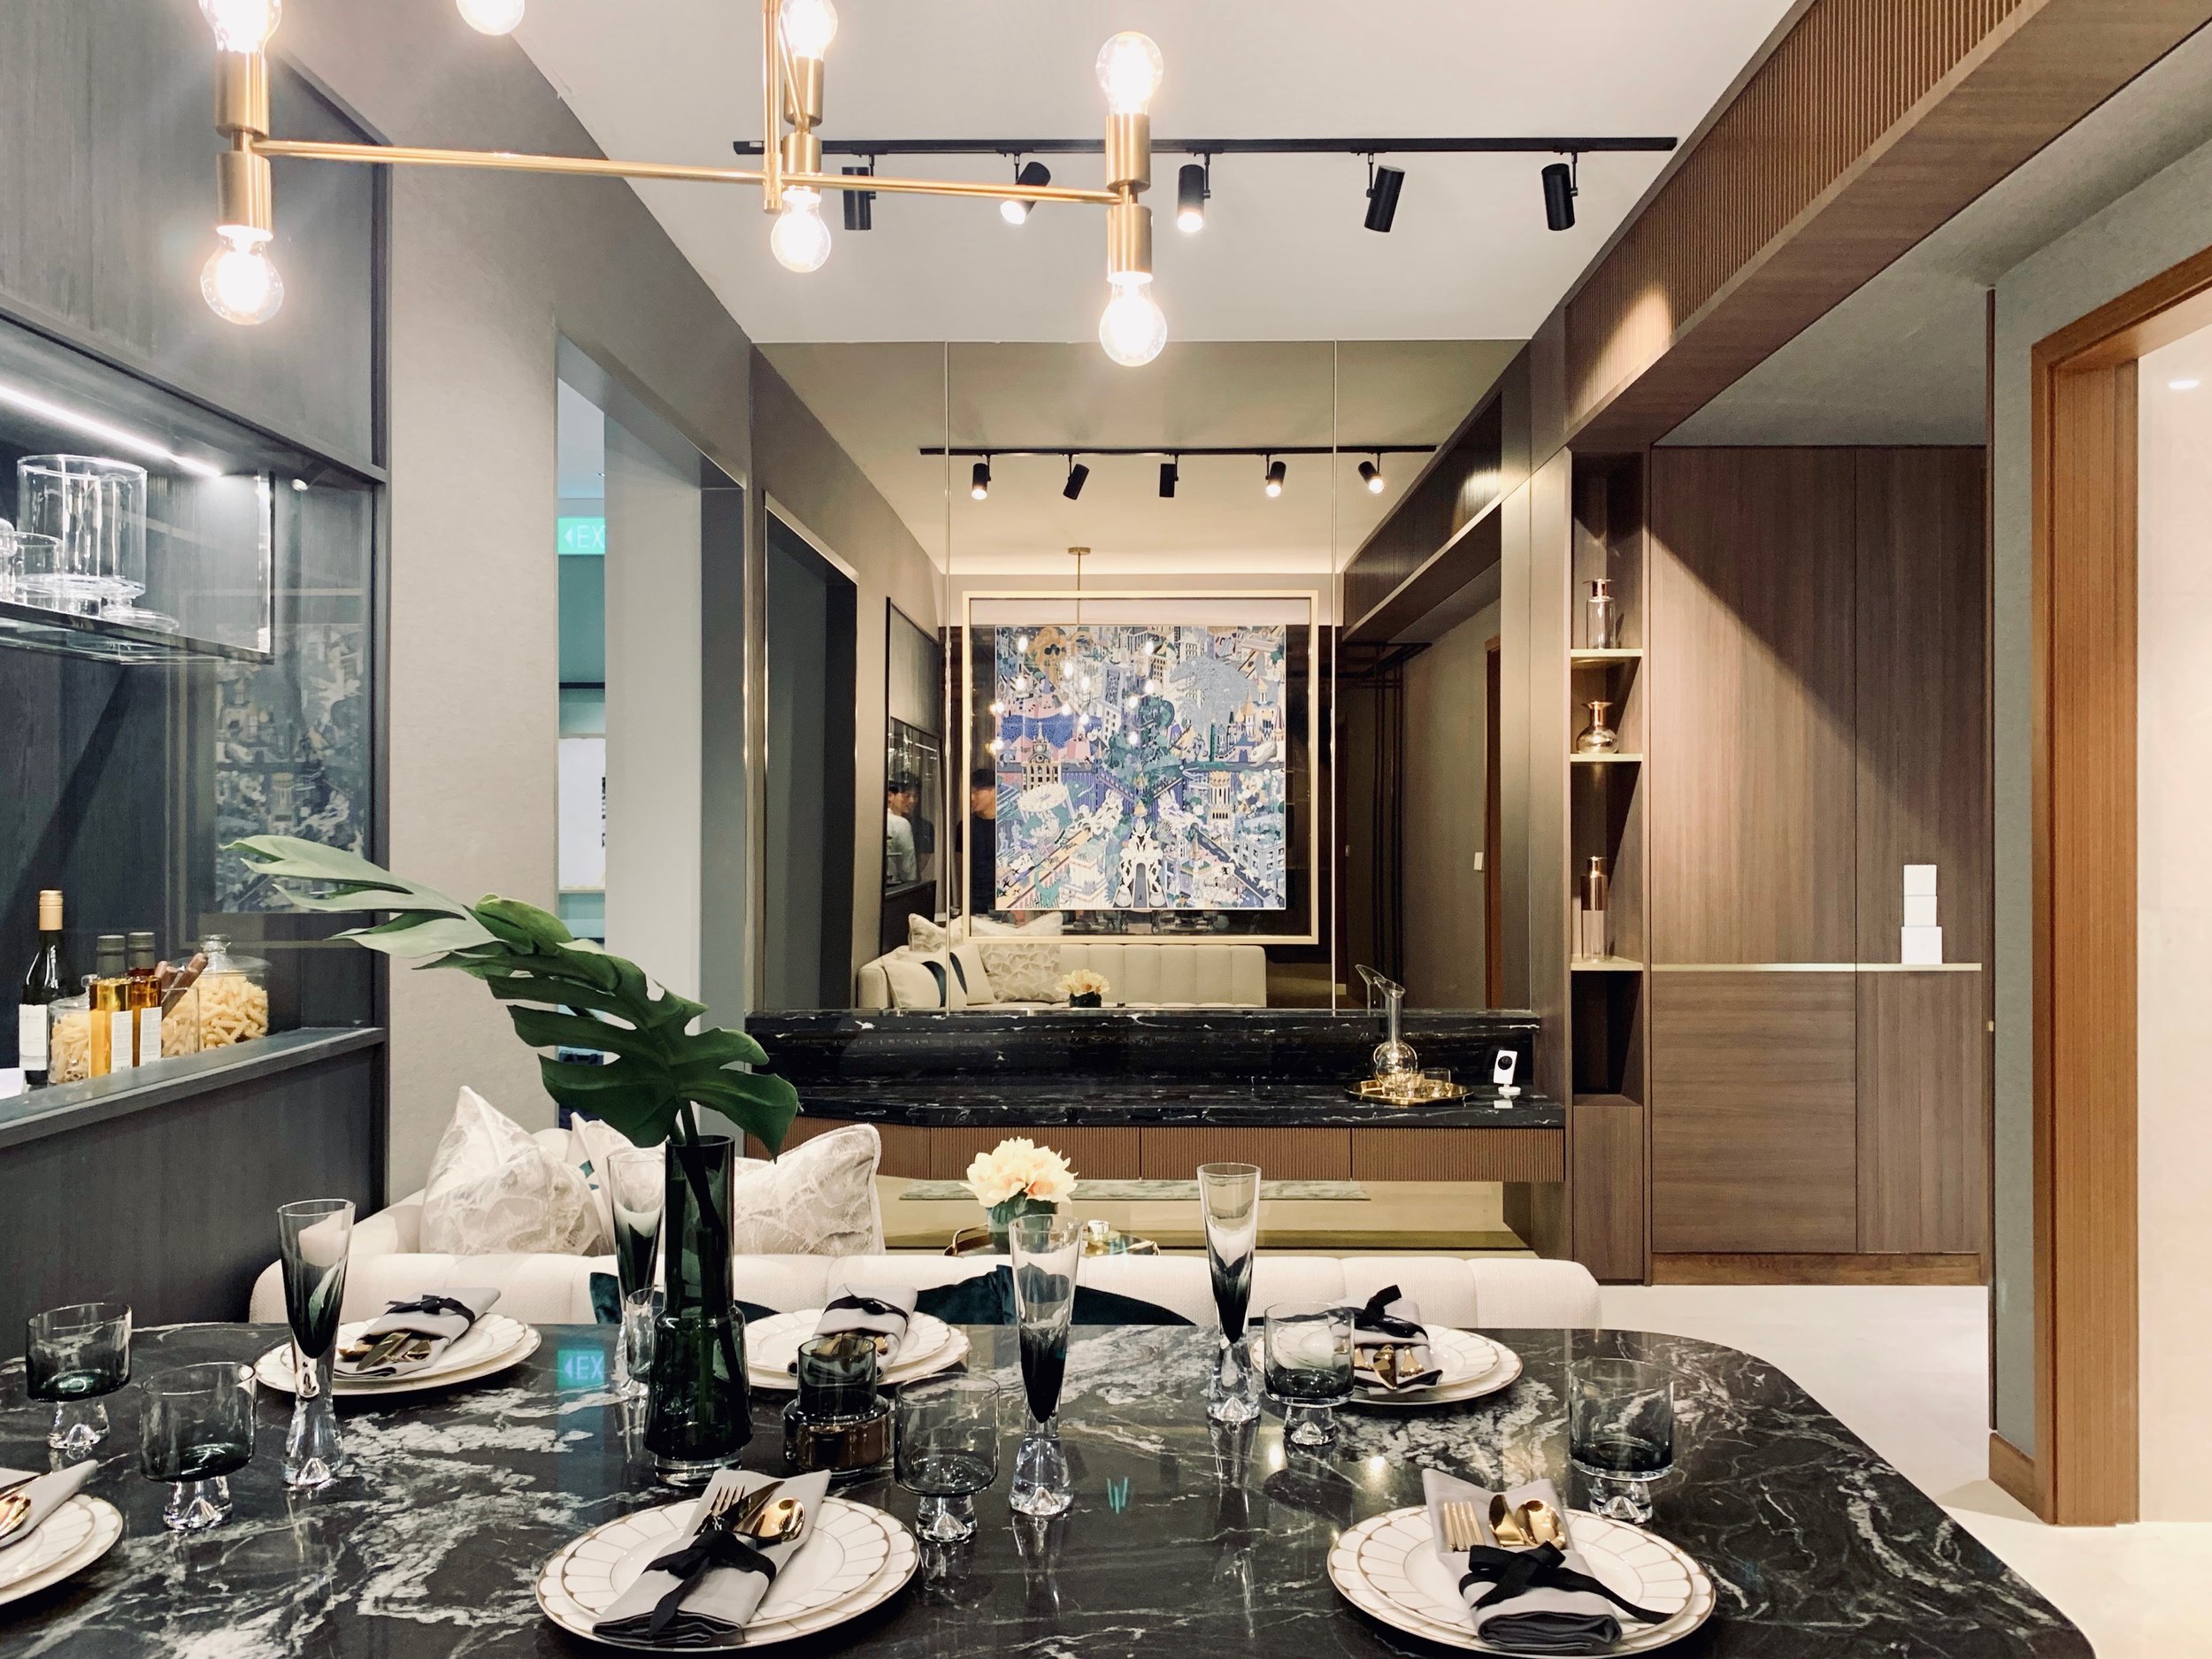  SHOWUNIT / 2019  The showunit emphasized on the tropical luxury within the lush enclave of the development. Simple treatment and smart space planning resulted in a concise design treatment throughout the unit. 